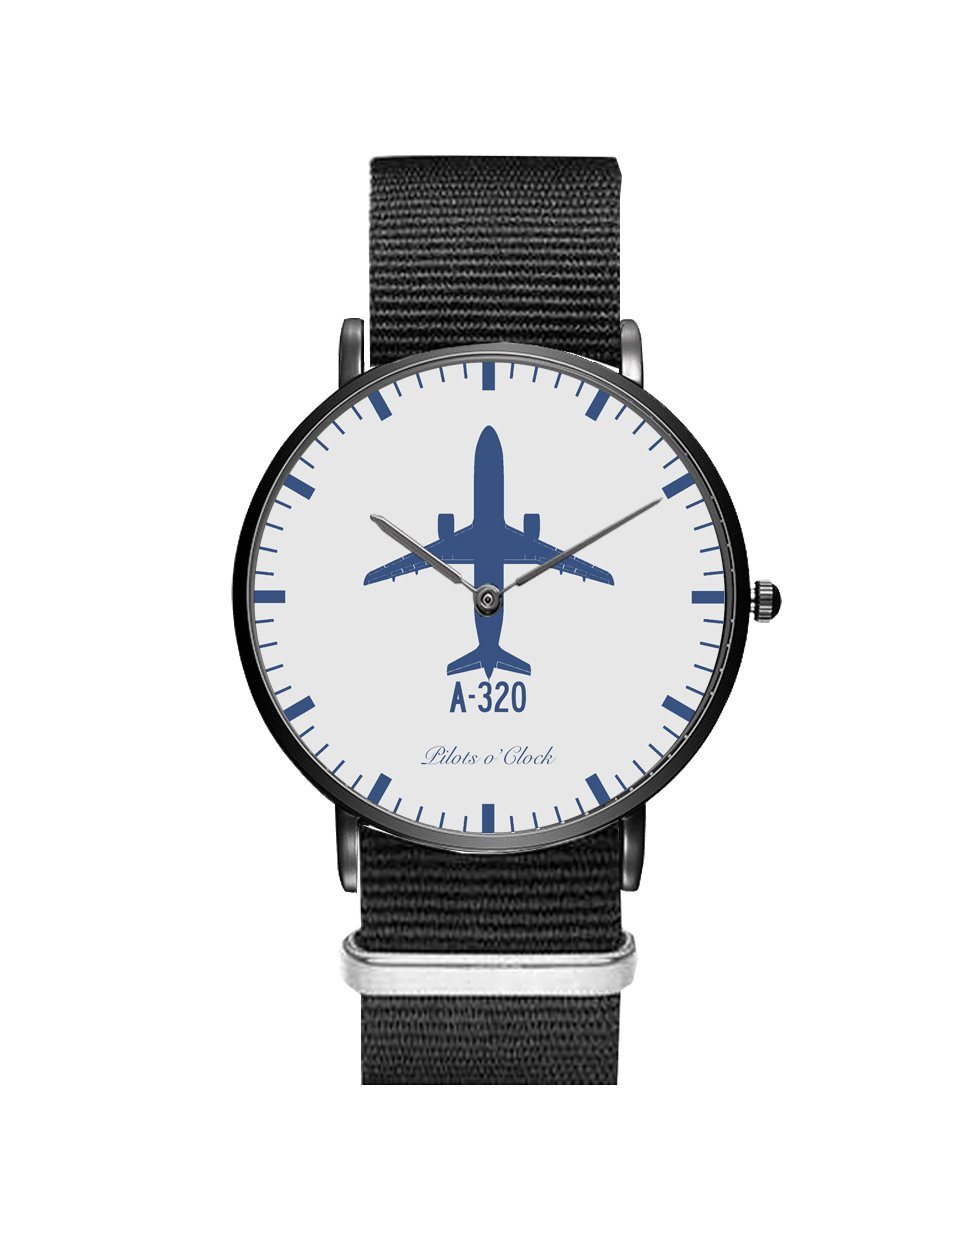 Airbus A320 Leather Strap Watches Pilot Eyes Store 